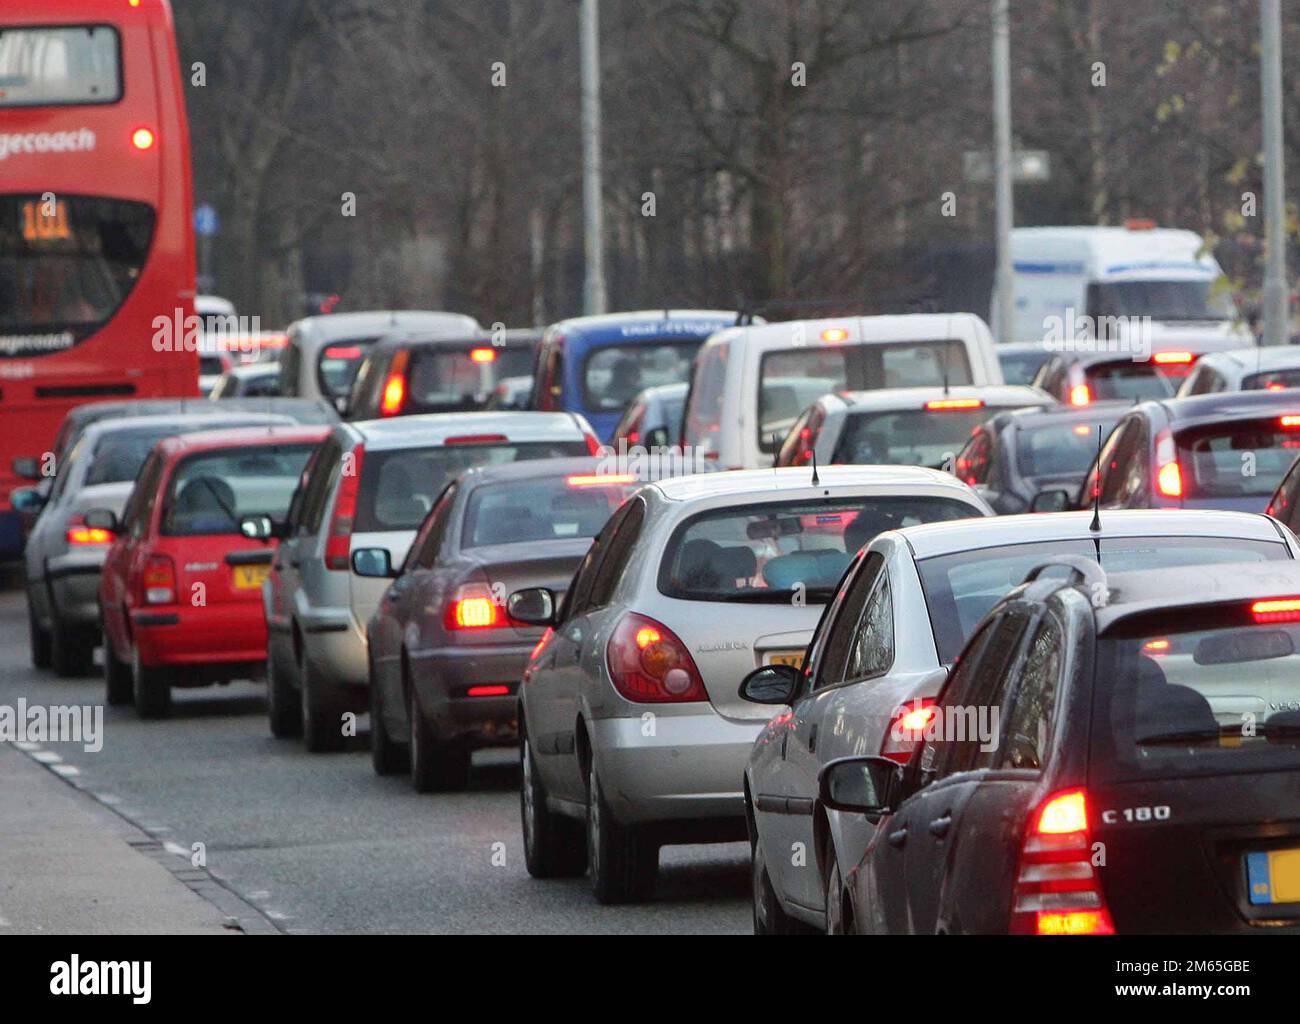 File photo dated 10/12/08 of early morning road congestion. More than 100 road traffic officers and control room operators working for National Highways across England will launch a 48-hour strike on Tuesday. The walkout by members of the Public and Commercial Services (PCS) is part of industrial action in a bitter dispute over pay, pensions and jobs. Issue date: Monday January 2, 2023. Stock Photo